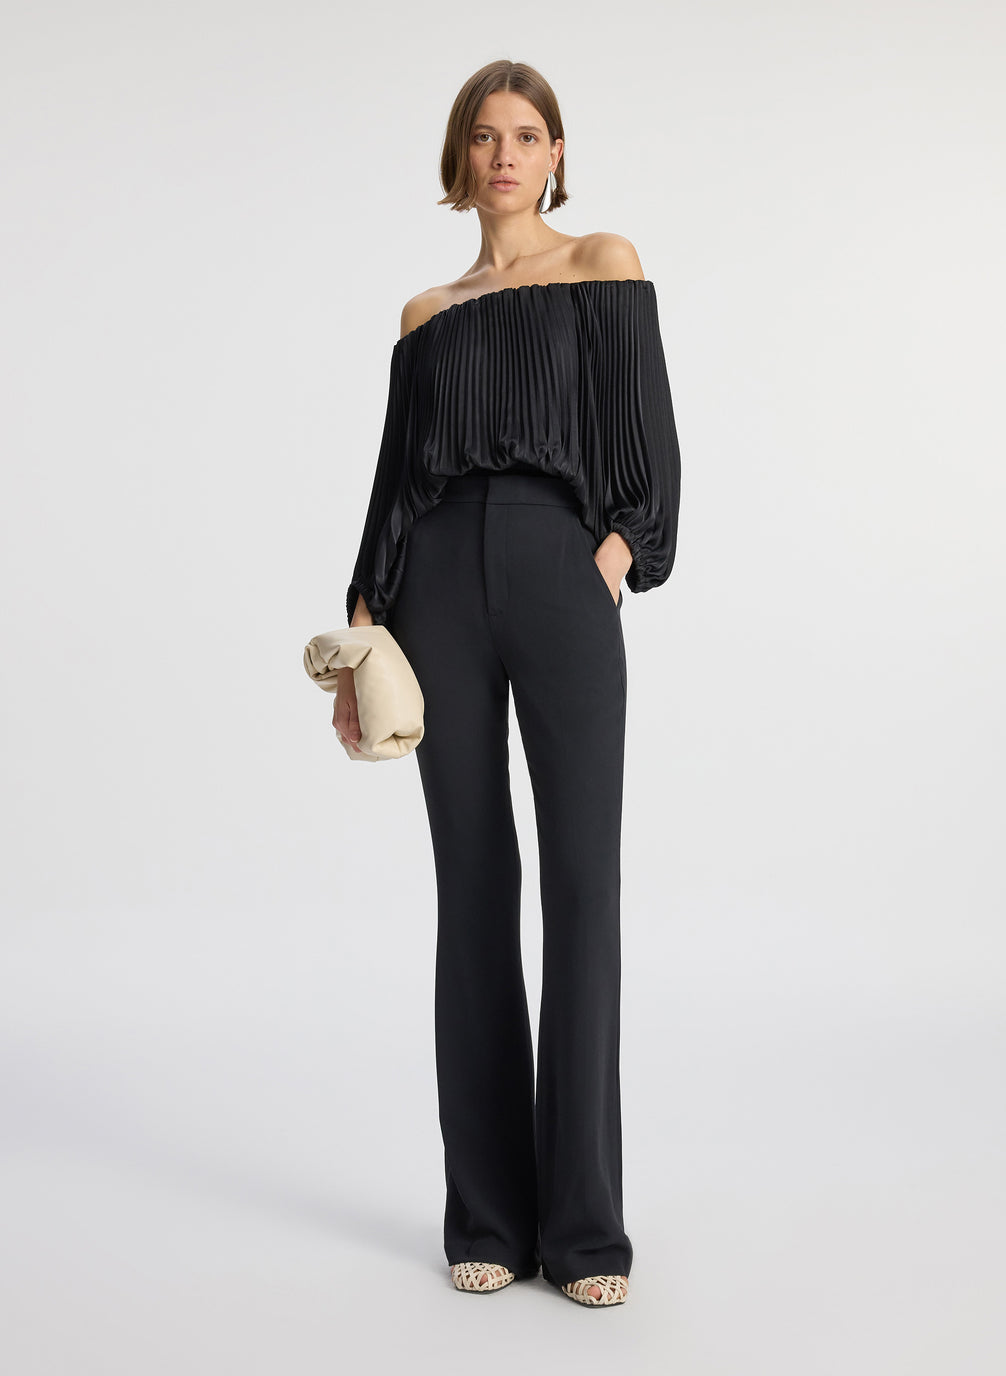 front view of woman wearing black satin pleated off the shoulder top with black pants